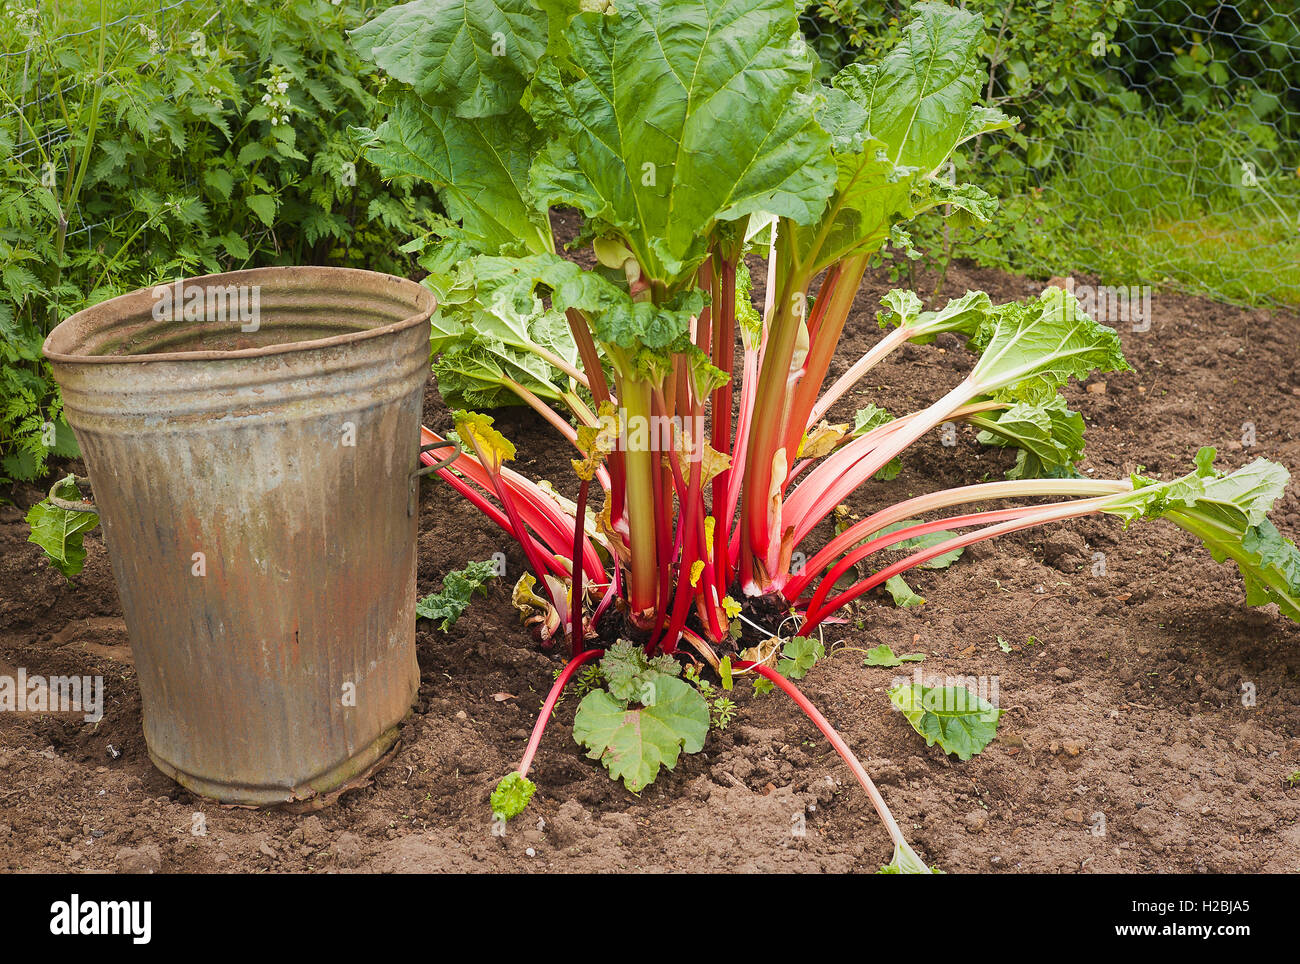 Rhubarb immediately after forcing enclosure removed showing tall ripe stems ready for picking Stock Photo